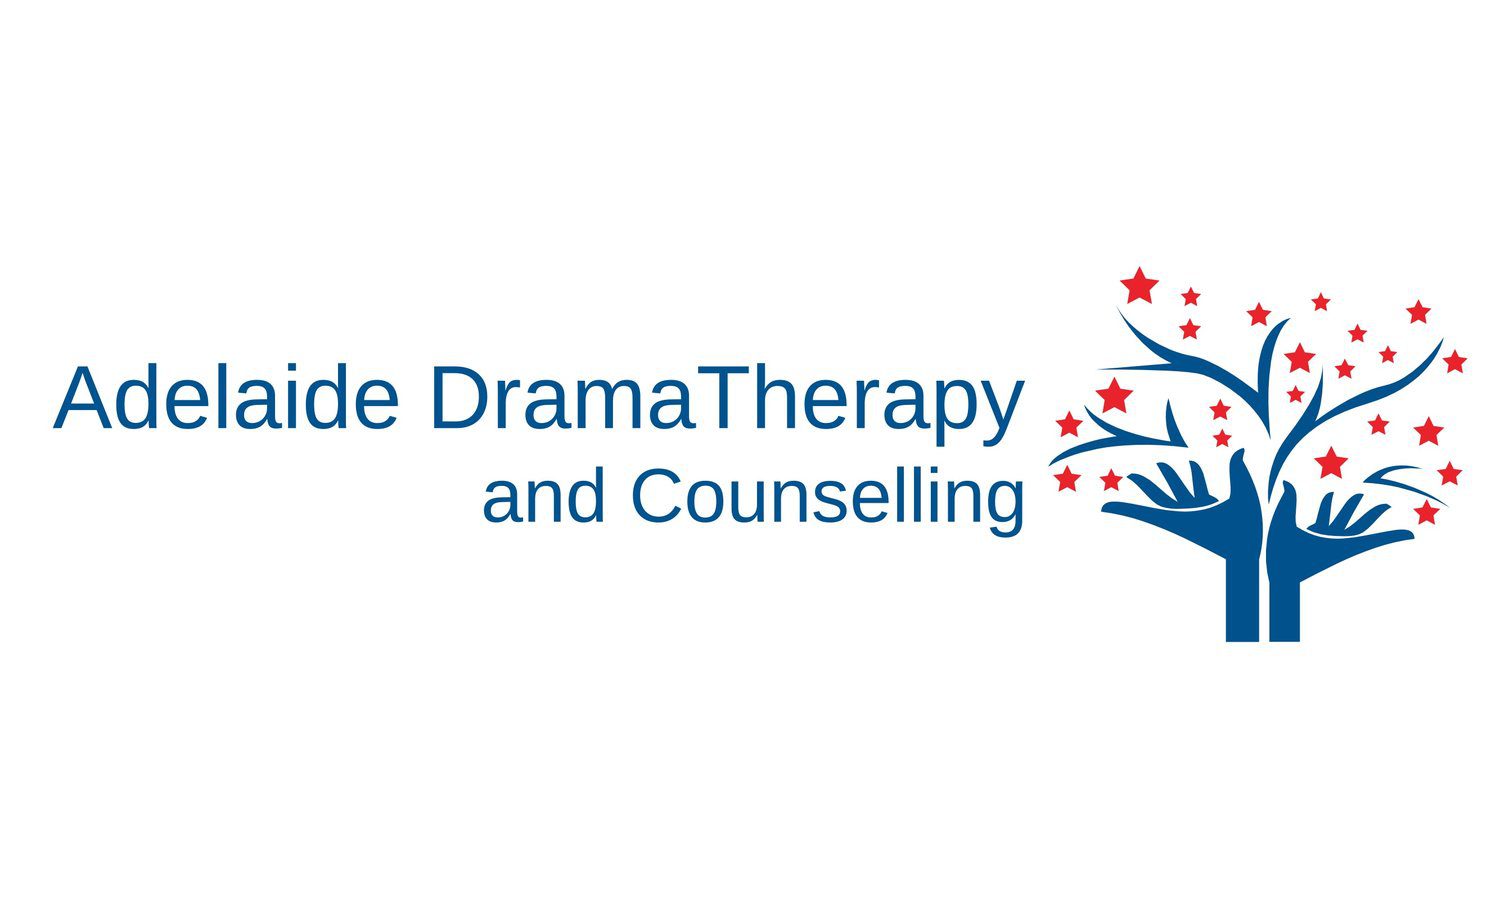 Adelaide Drama Therapy and Counselling